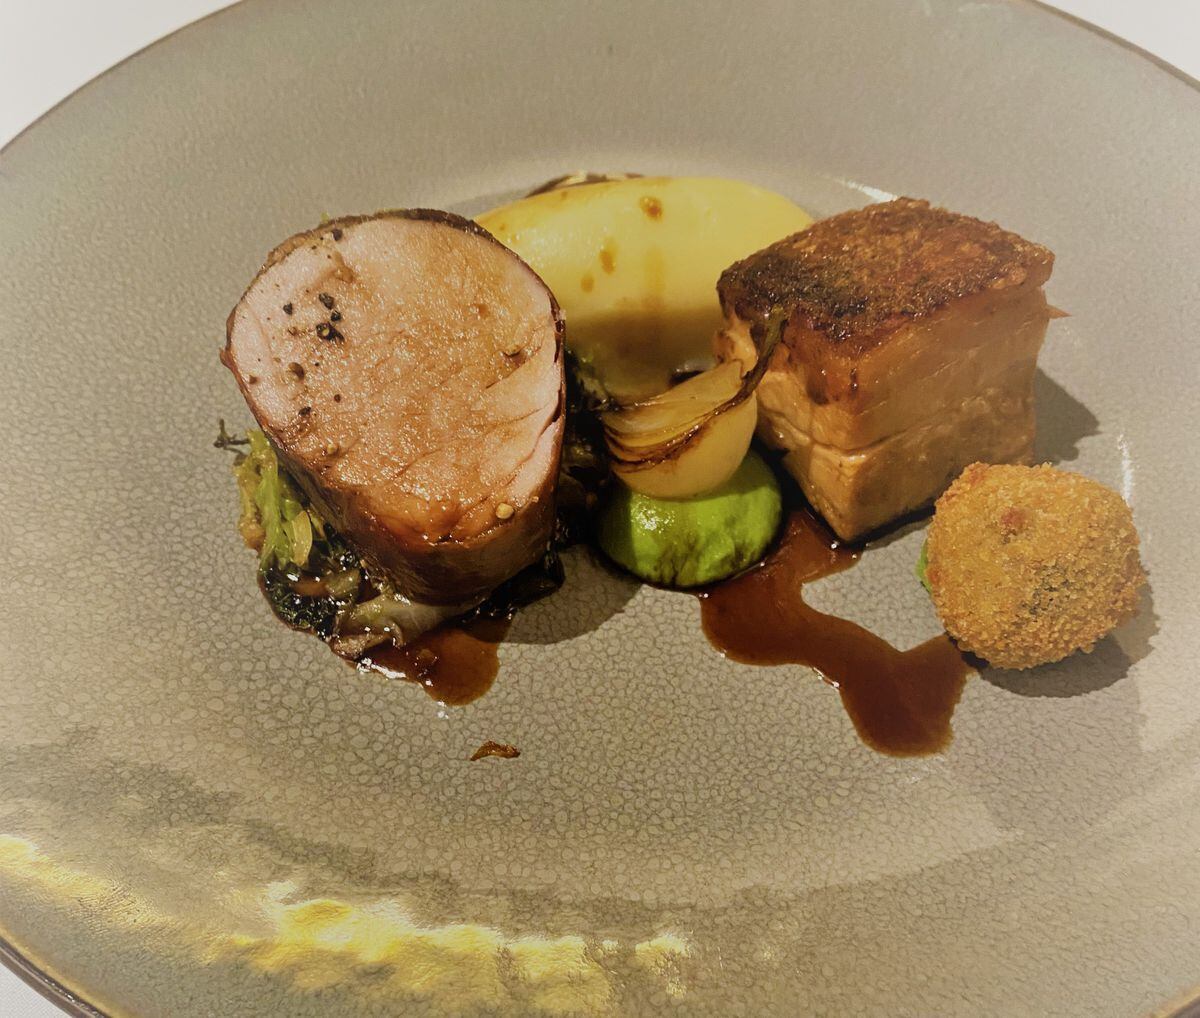 Pork tenderloin with savoy cabbage and shallot